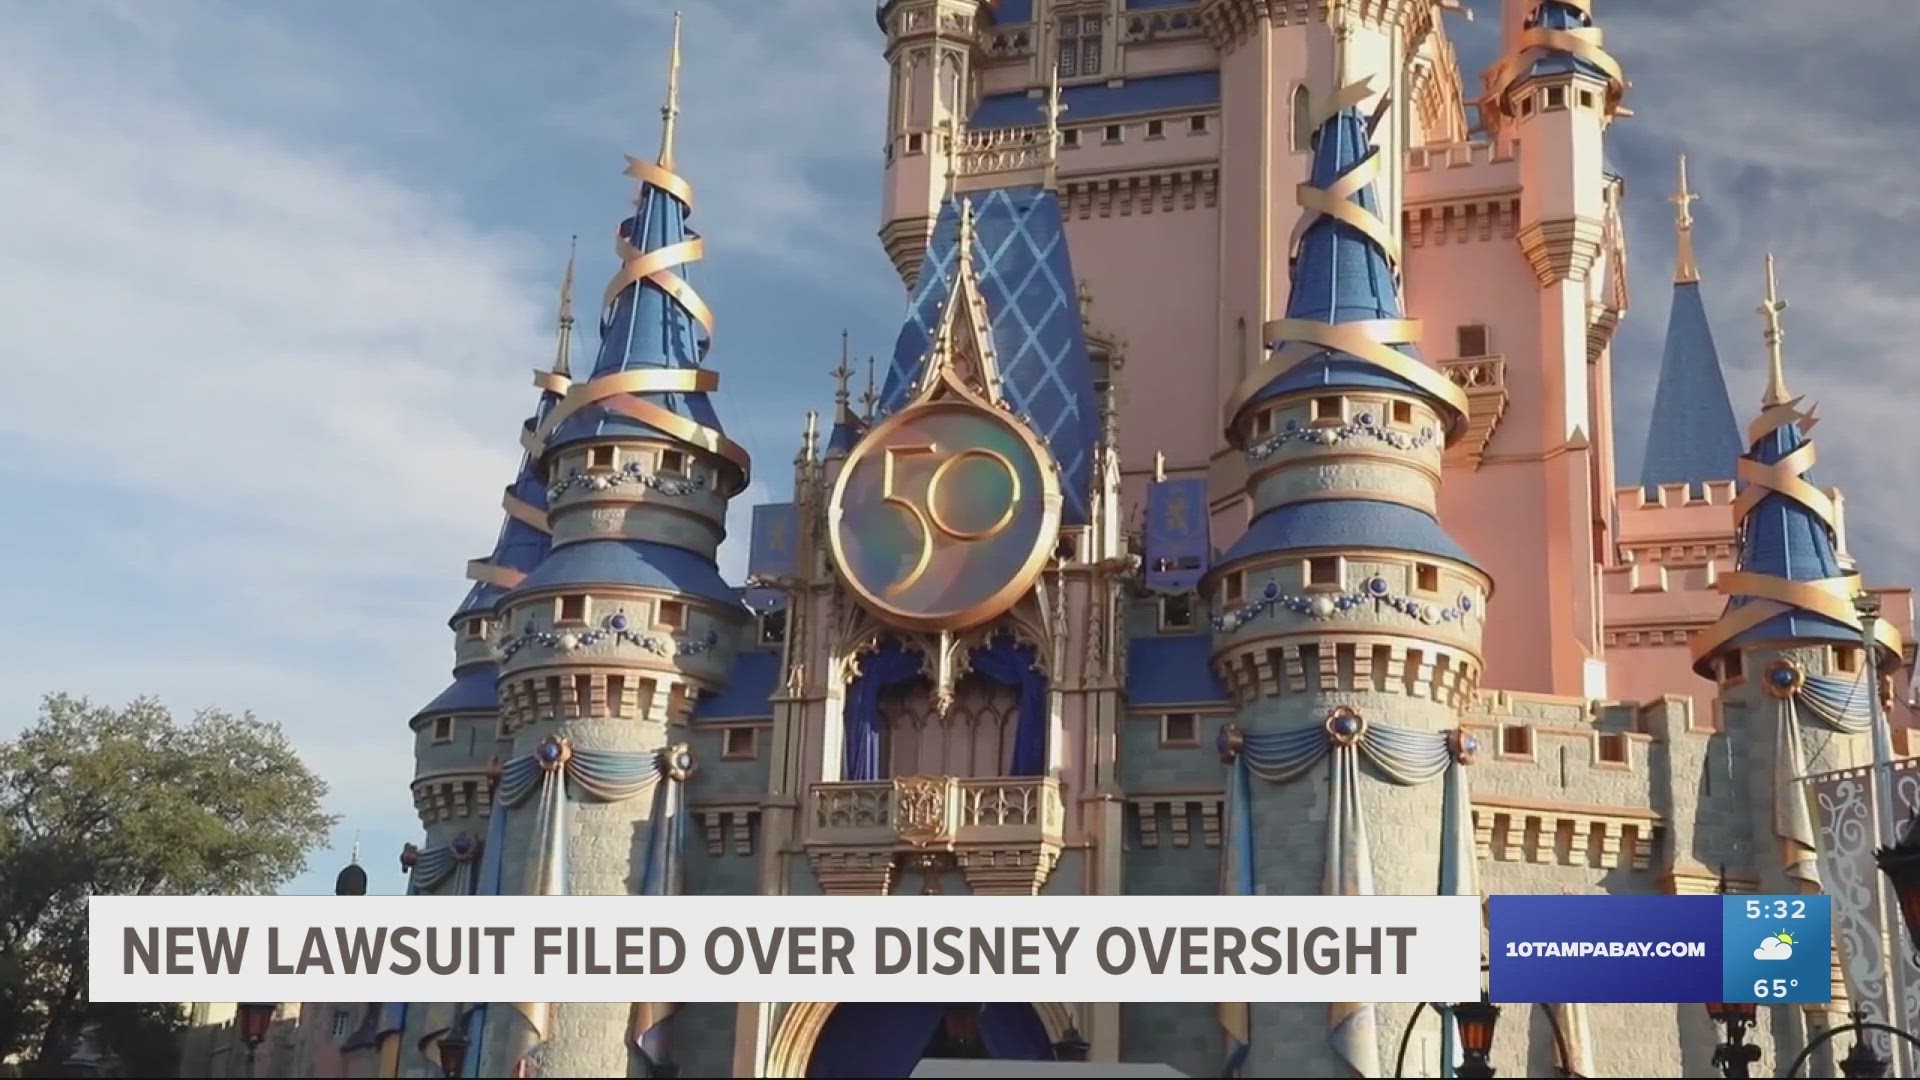 Disney, DeSantis and the DeSantis appointees already are battling for control of the government in two pending lawsuits in federal and state court.